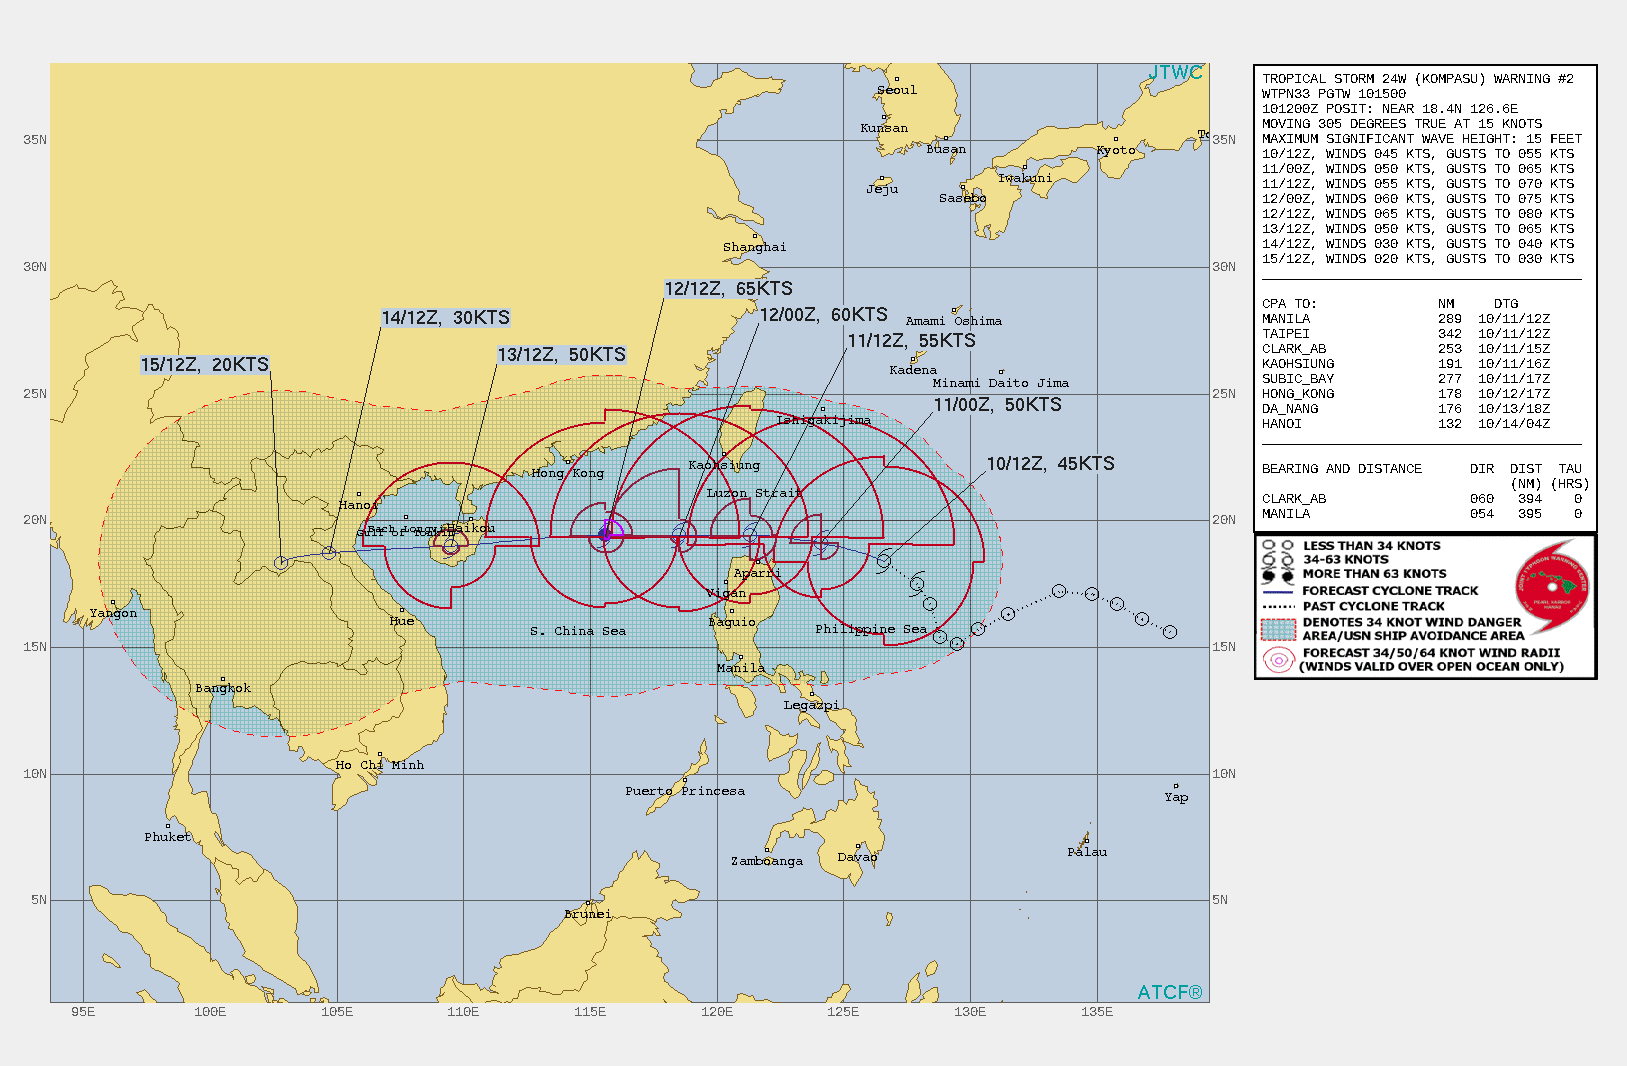 FORECAST REASONING.  SIGNIFICANT FORECAST CHANGES: THERE ARE NO SIGNIFICANT CHANGES TO THE FORECAST FROM THE PREVIOUS WARNING.  FORECAST DISCUSSION: THE SUBTROPICALRIDGE(STR) IS EXPECTED TO BUILD AND EXTEND WESTWARD AND DRIVE THE SYSTEM WEST-NORTHWESTWARD THEN DUE WESTWARD THROUGH THE LUZON STRAIT, INTO THE SOUTH CHINA SEA (SCS), ACROSS HAINAN AND THE GULF OF TONKIN BEFORE MAKING LANDFALL IN NORTHERN VIETNAM AROUND 96H. THE MARGINALLY FAVORABLE ENVIRONMENT WILL FUEL GRADUAL INTENSIFICATION TO A PEAK OF 65KNOTS/CAT 1 IN THE SCS WHERE THE ENVIRONMENT IS EXPECTED TO BE MORE FAVORABLE. AFTERWARD, INCREASING VERTICAL WIND SHEAR WILL SLOWLY WEAKEN THE SYSTEM DOWN TO 50KNOTS AT 72H AS IT TRACKS OVER HAINAN. AFTER LANDFALL, INTERACTION WITH THE RUGGED VIETNAMESE TERRAIN WILL RAPIDLY ERODE THE SYSTEM DOWN TO 20KNOTS AFTER IT CROSSES INTO CAMBODIA.